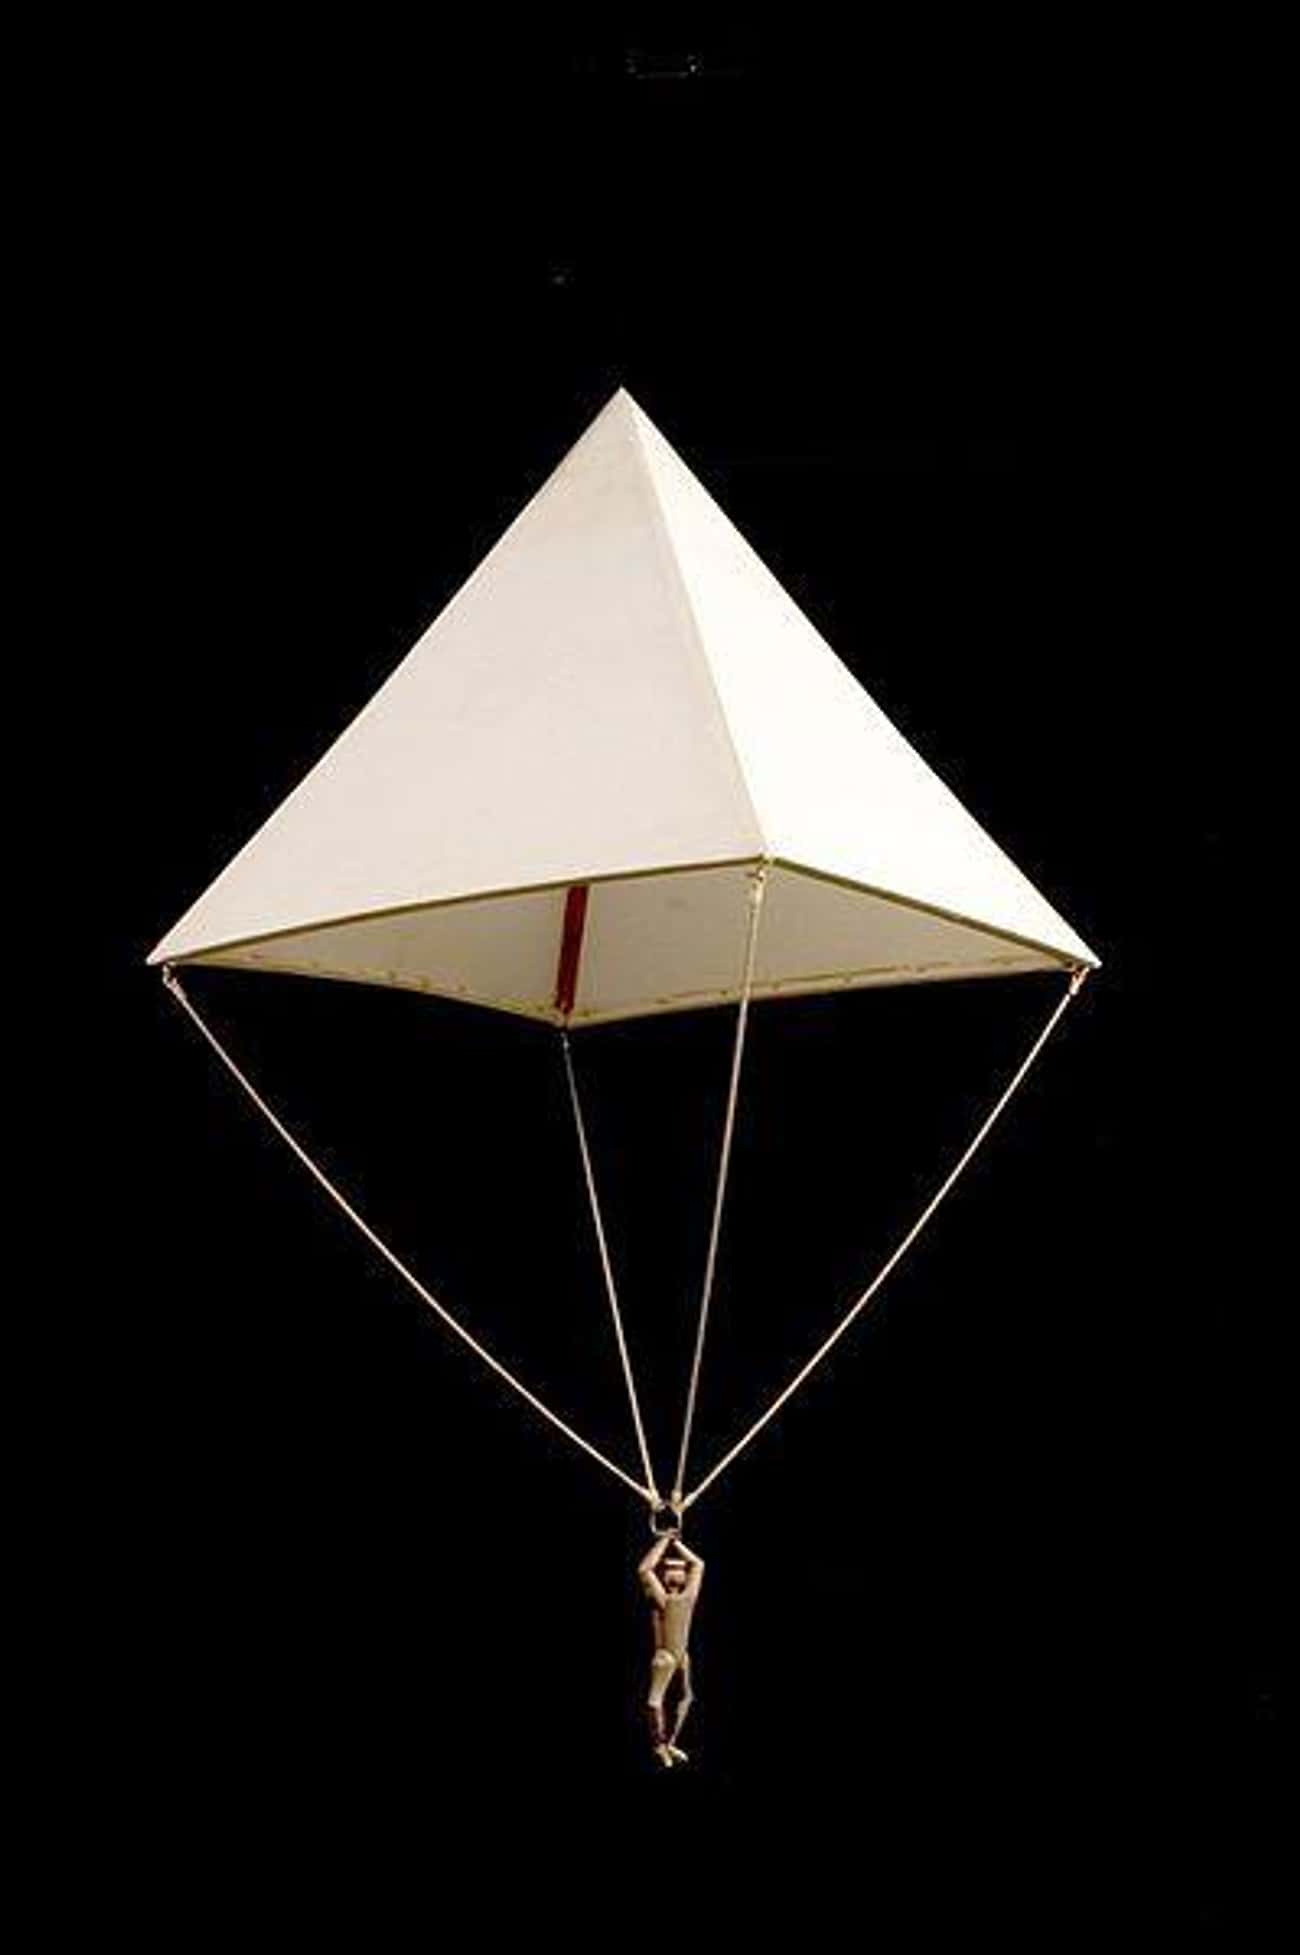 A Pyramid-Shaped Parachute Let People Drop Safely From The Sky 